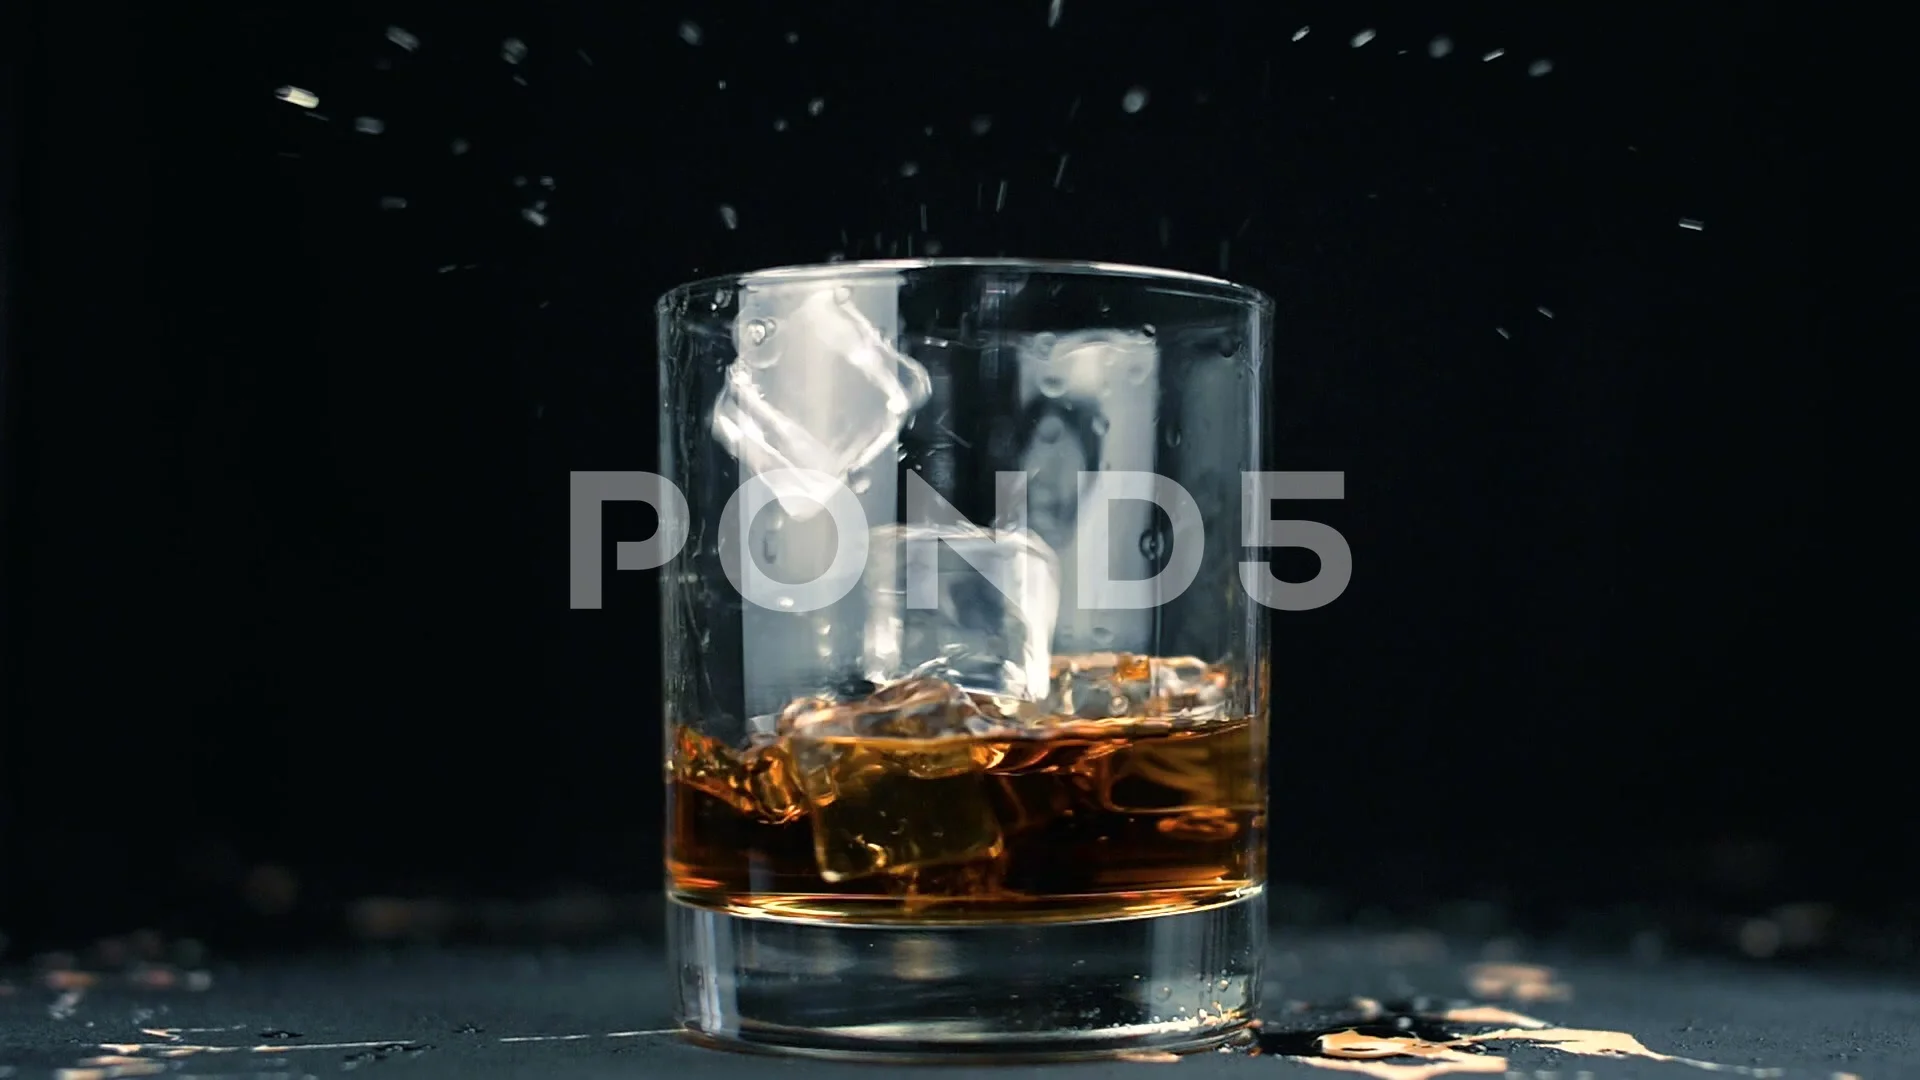 https://images.pond5.com/ice-cubes-falling-glass-whiskey-footage-099179525_prevstill.jpeg